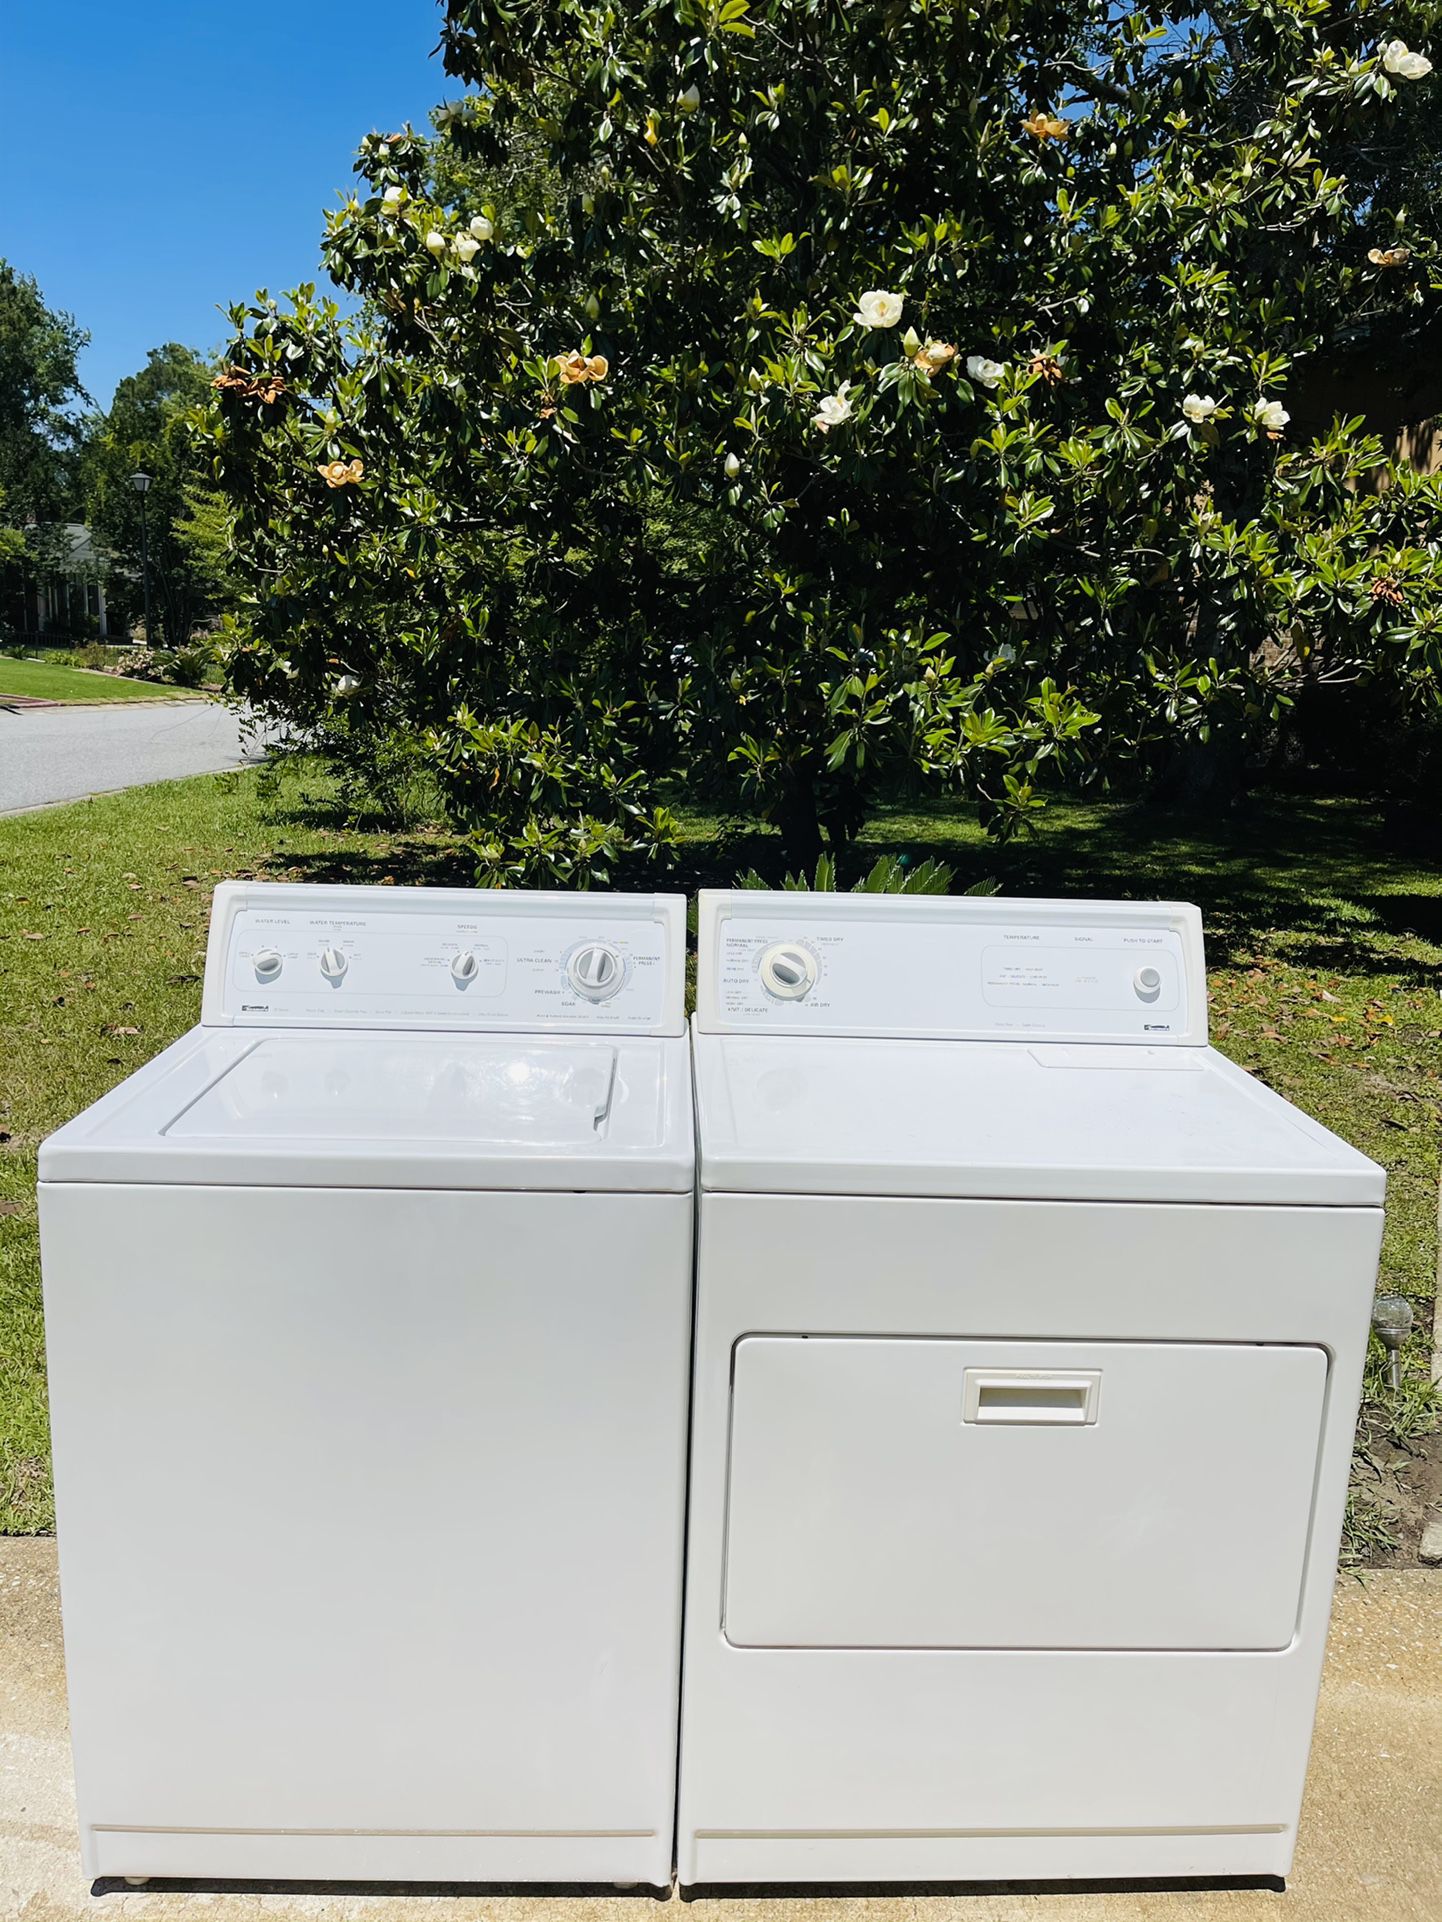 🌊Matching Kenmore Washer and Dryer Set Available🌊